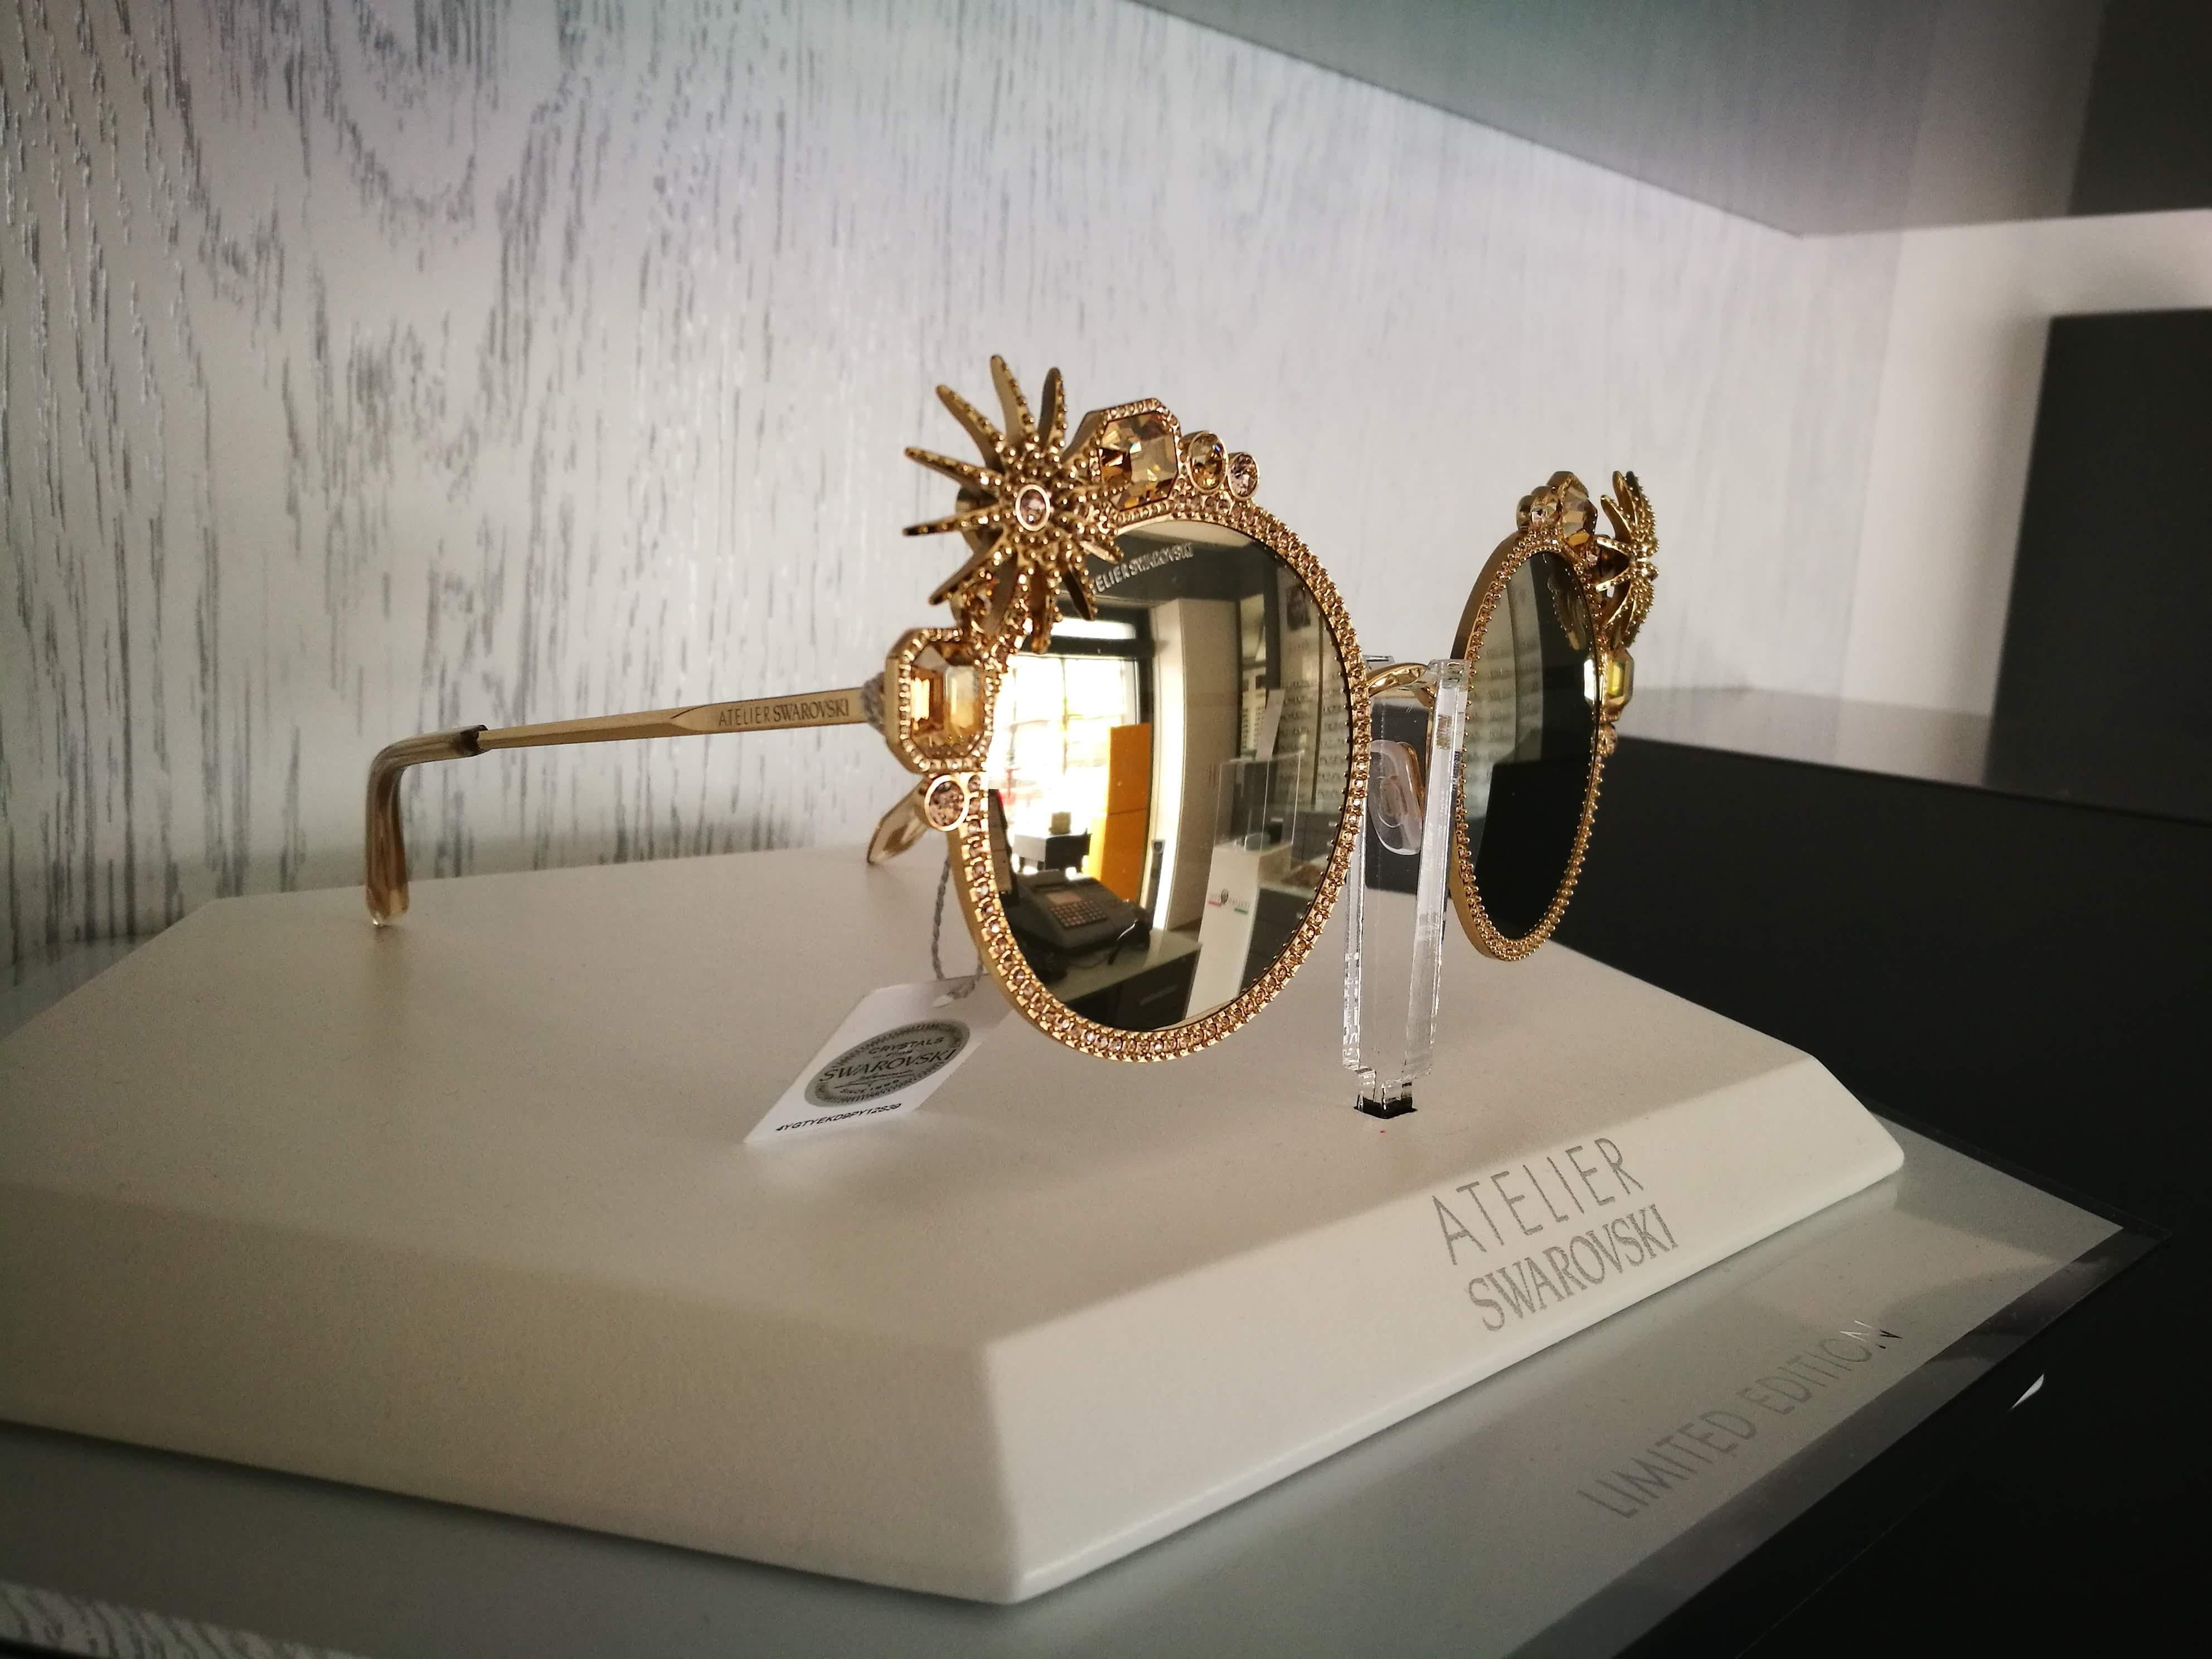 Amazing, rare and brand new from boutique !
Gold, SK240-P 32C
Atelier Swarovski's unmistakable craftsmanship and creativity shines in a collection of crystal embellished sunglasses handcrafted in Italy
Round sunglasses - Smoke flash gold lens;